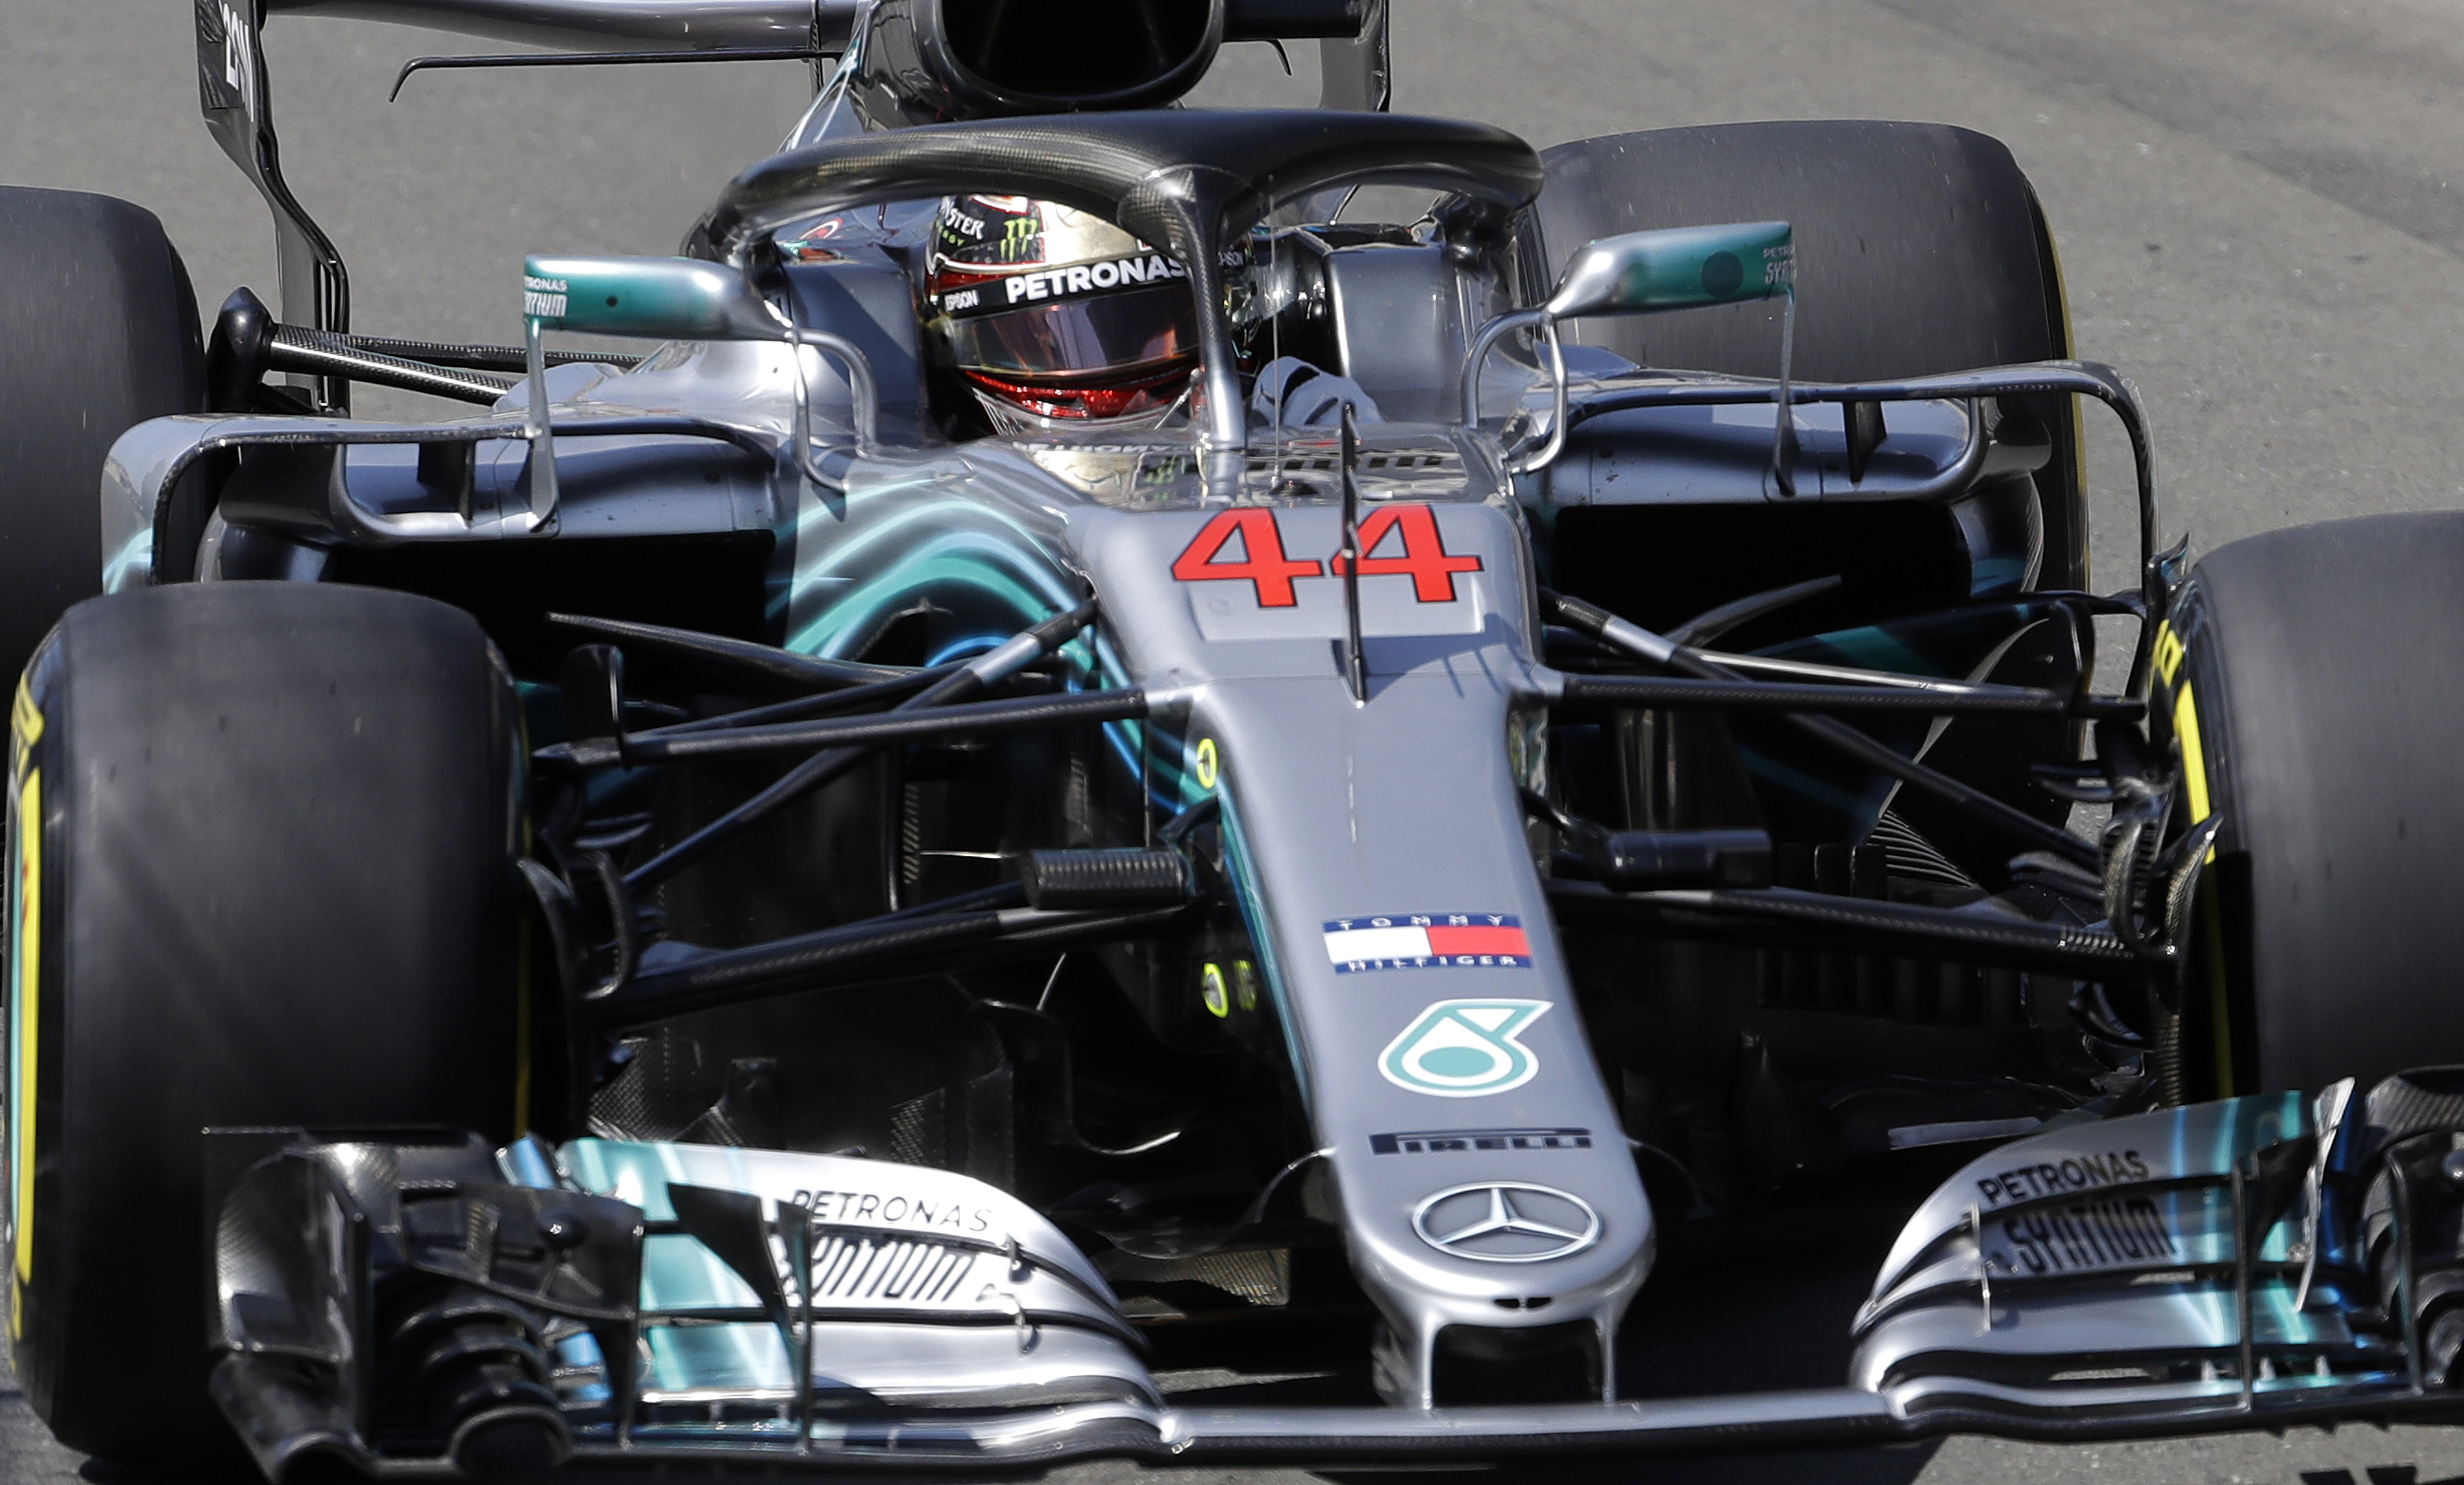 Mercedes driver Lewis Hamilton of Britain steers his car during the third free practice at the Silverstone racetrack, Silverstone, England, Saturday, July 7, 2018. The British Formula One Grand Prix will be held on Sunday. (AP Photo/Luca Bruno)